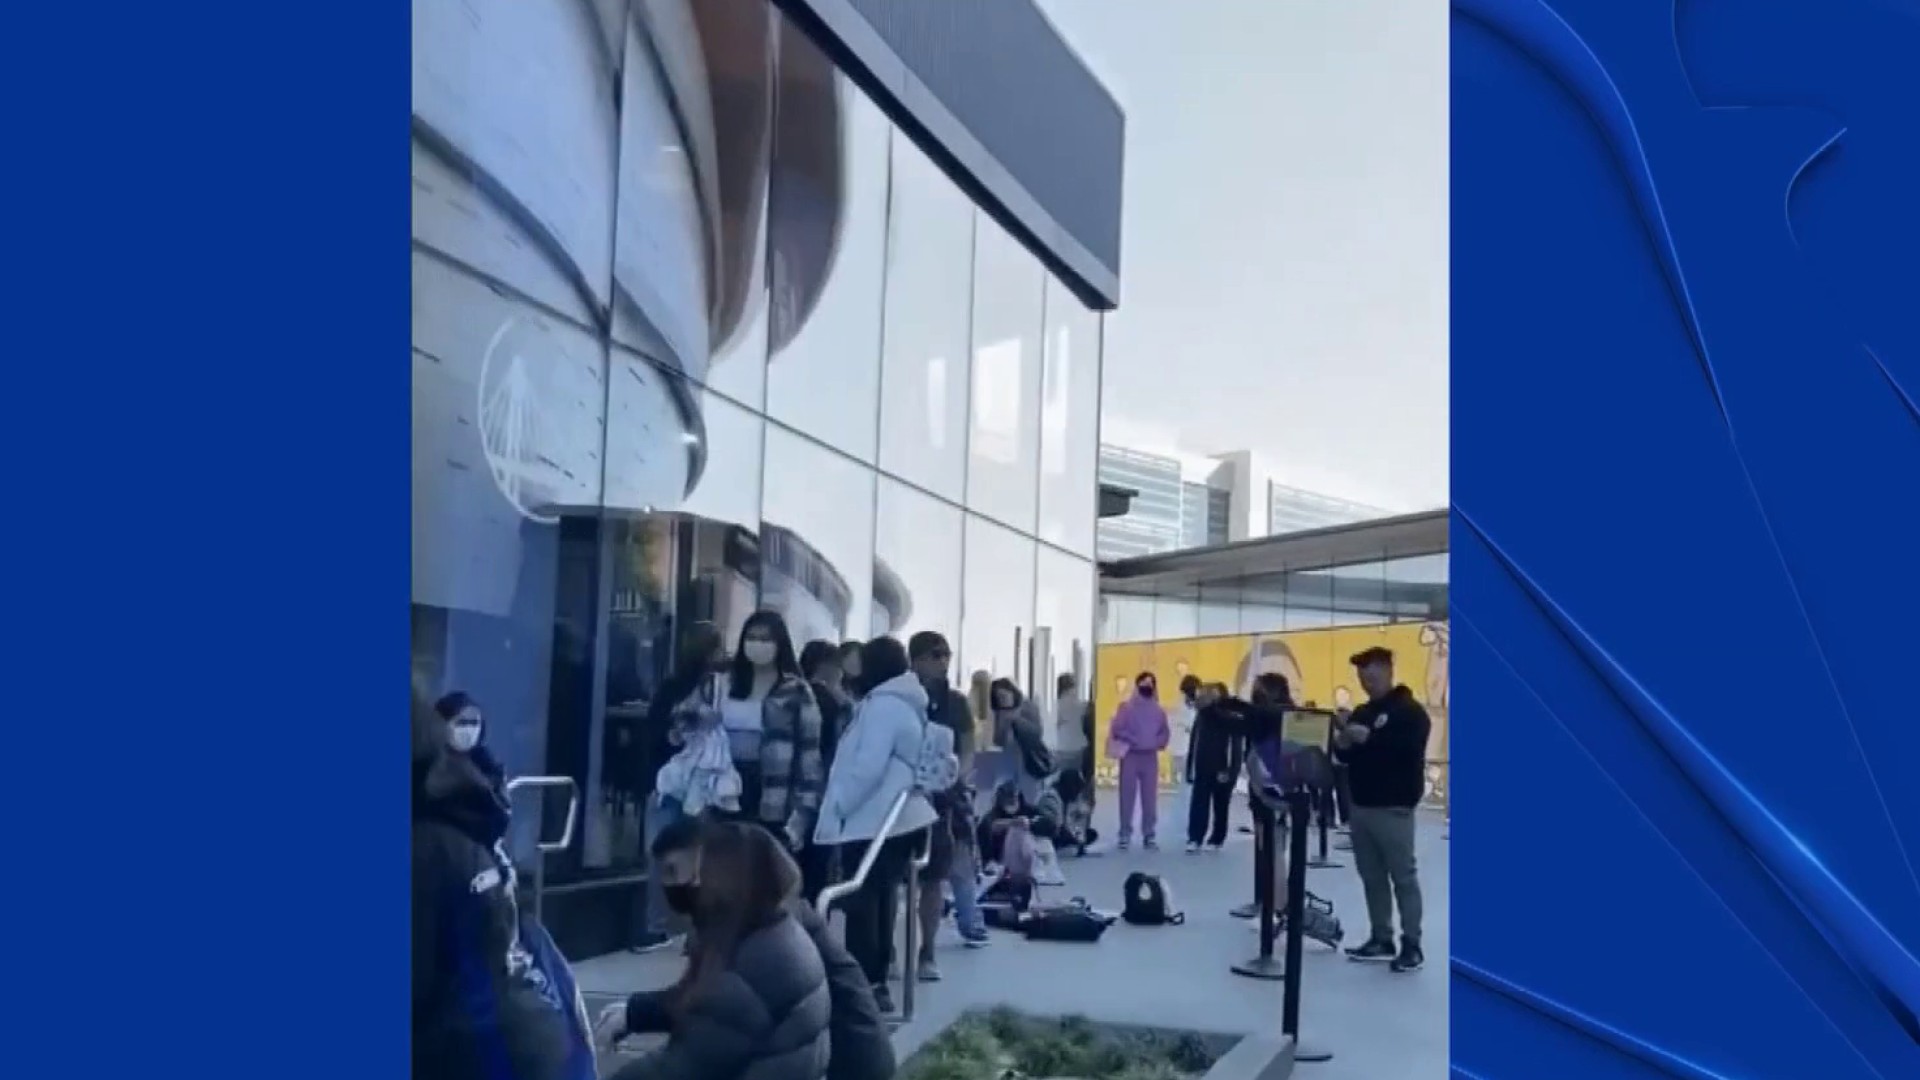 K-Pop Star BamBam's Warriors Merch Draws Large Crowd Outside Chase